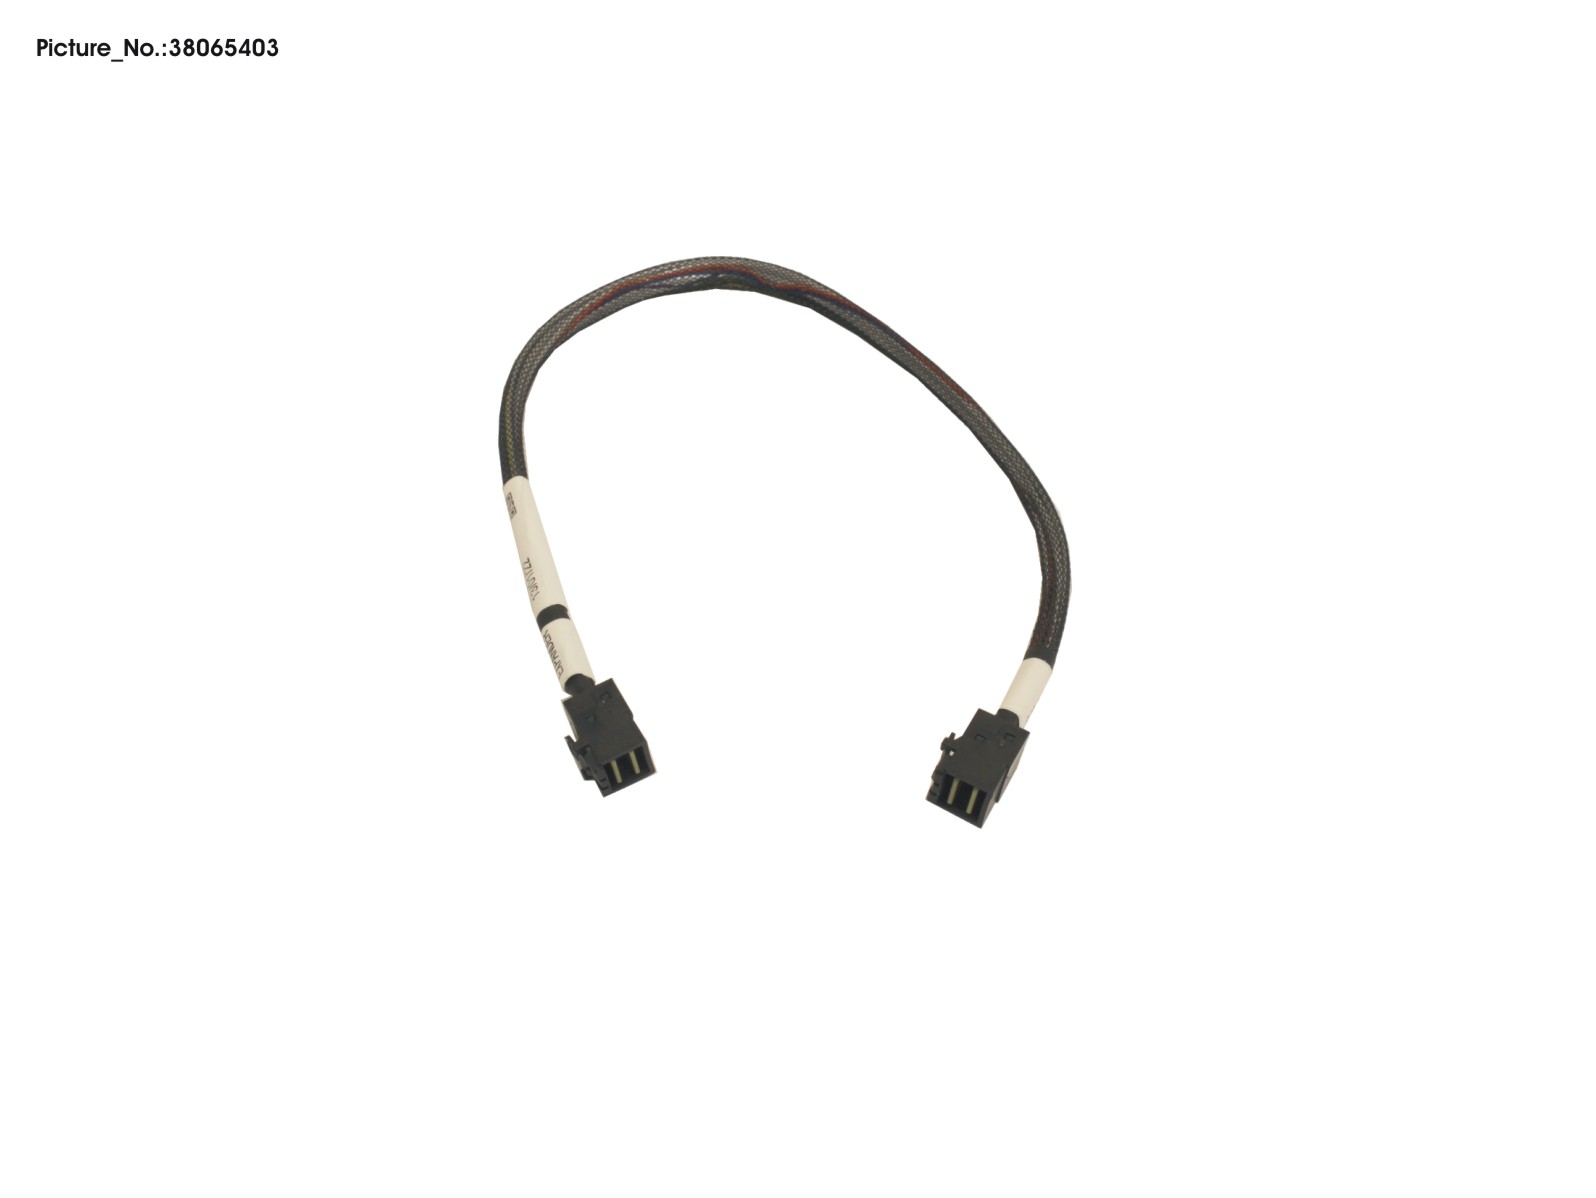 EXPANDER SIGNAL CABLE FOR BP3